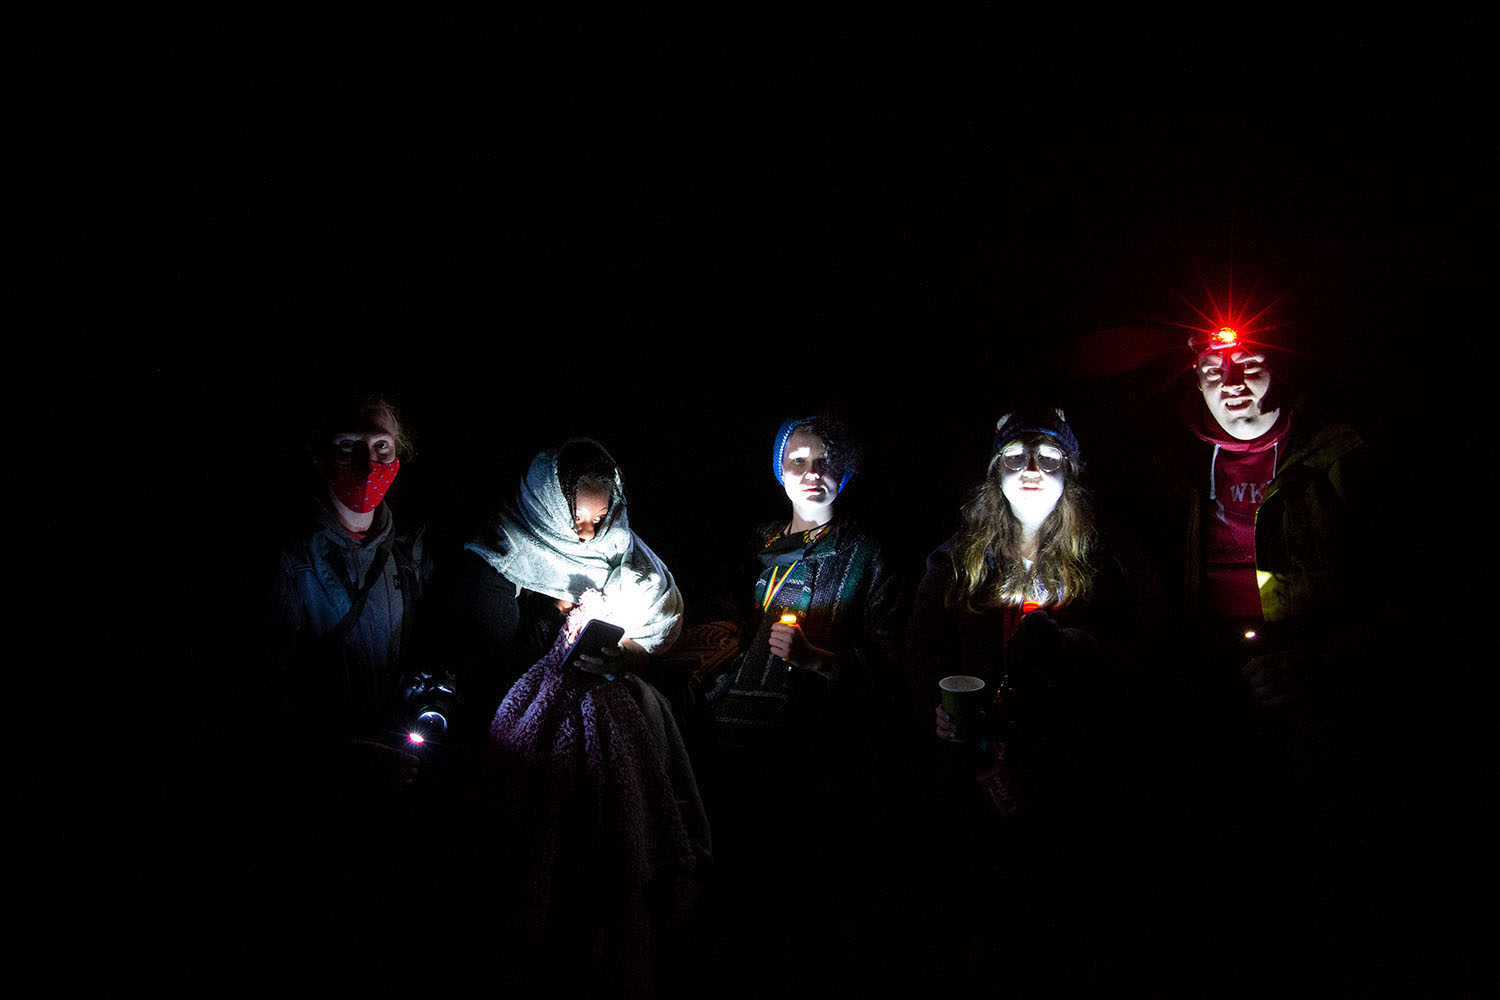 After learning to photograph the night sky at Shanty Hollow outside of Bowling Green, LLC students used flashlights to pose for a group photo.